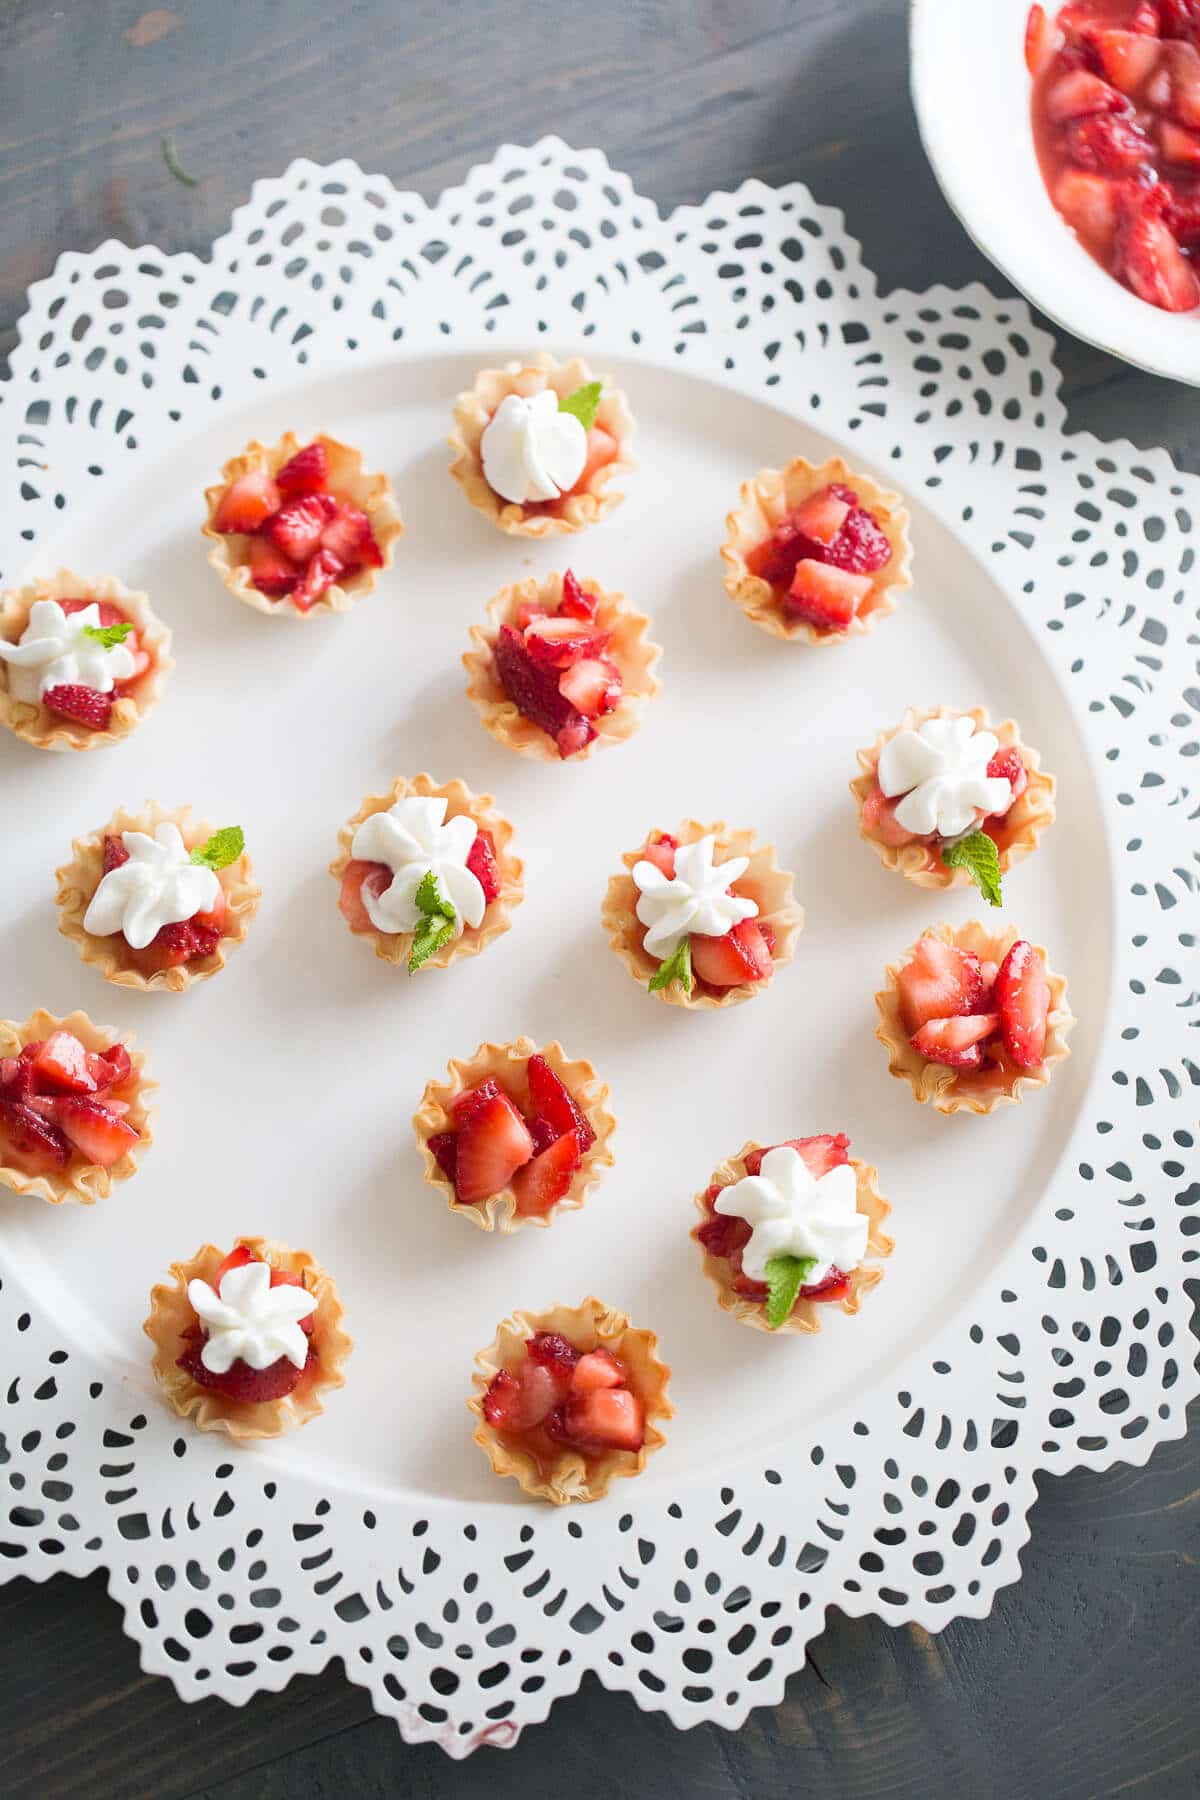 Strawberries Romanoff is such a great way to use fresh strawberries. Fillo cups make the best cups for this simple, fruity recipe.